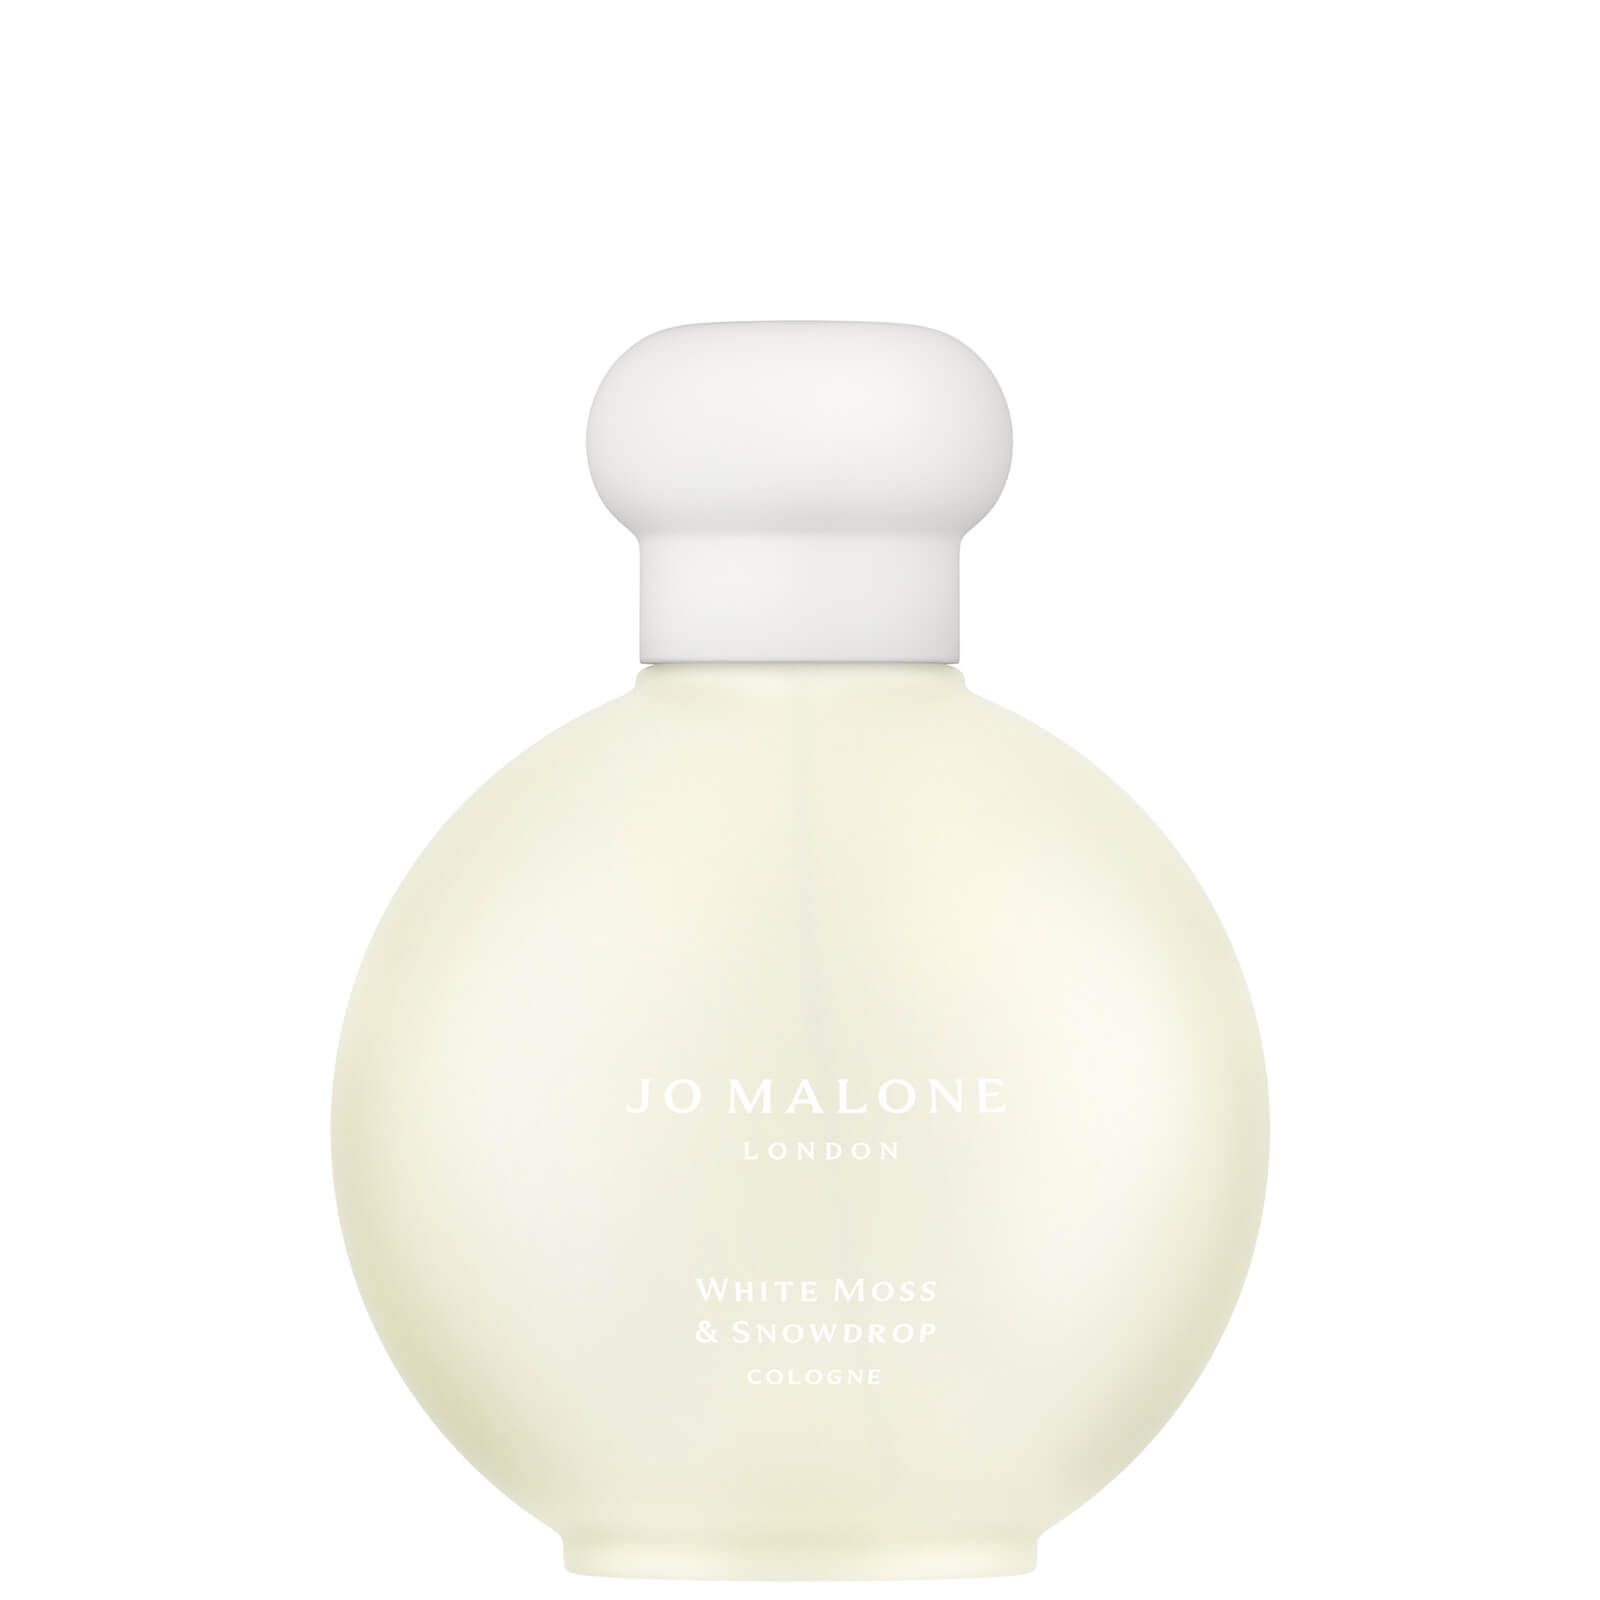 Jo Malone London White Moss and Snowdrop Cologne 100ml